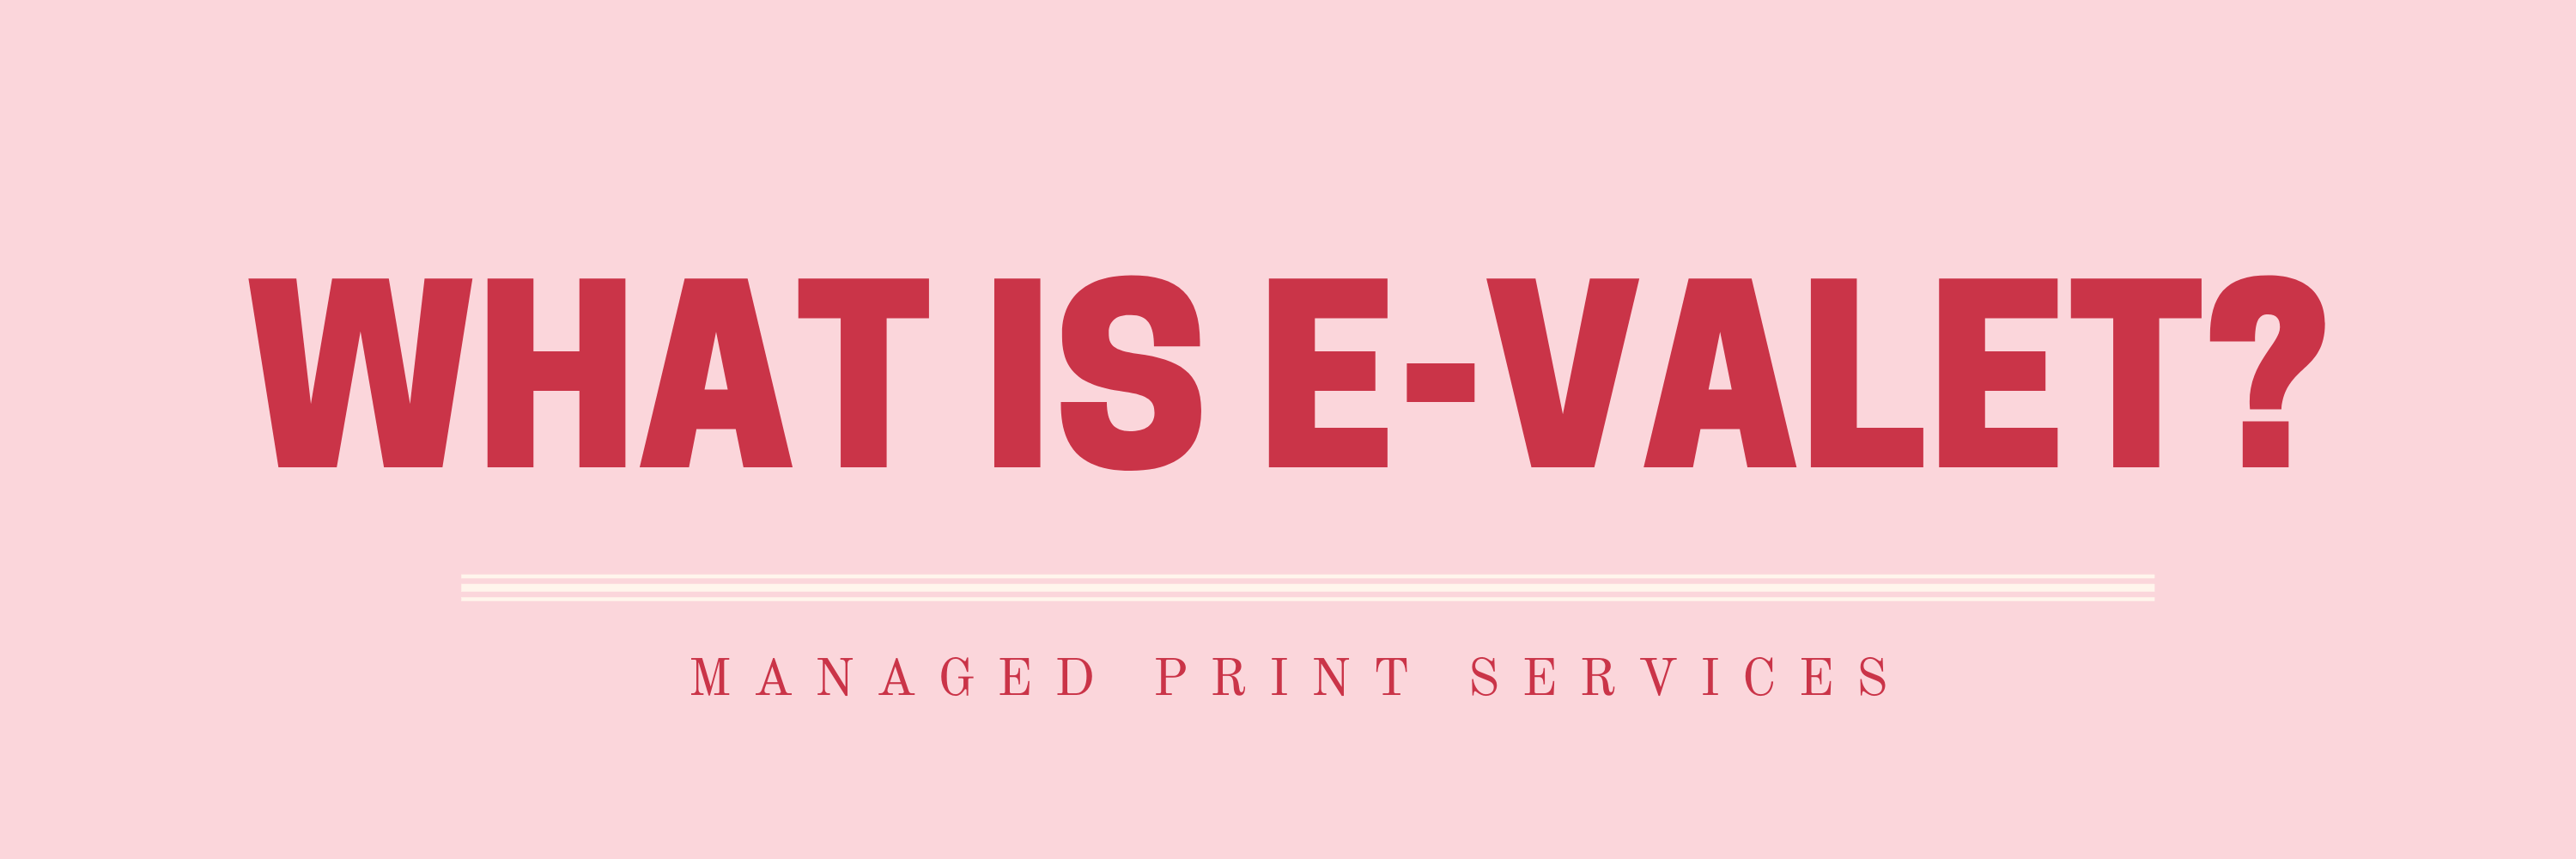 What is eValet? Managed print services